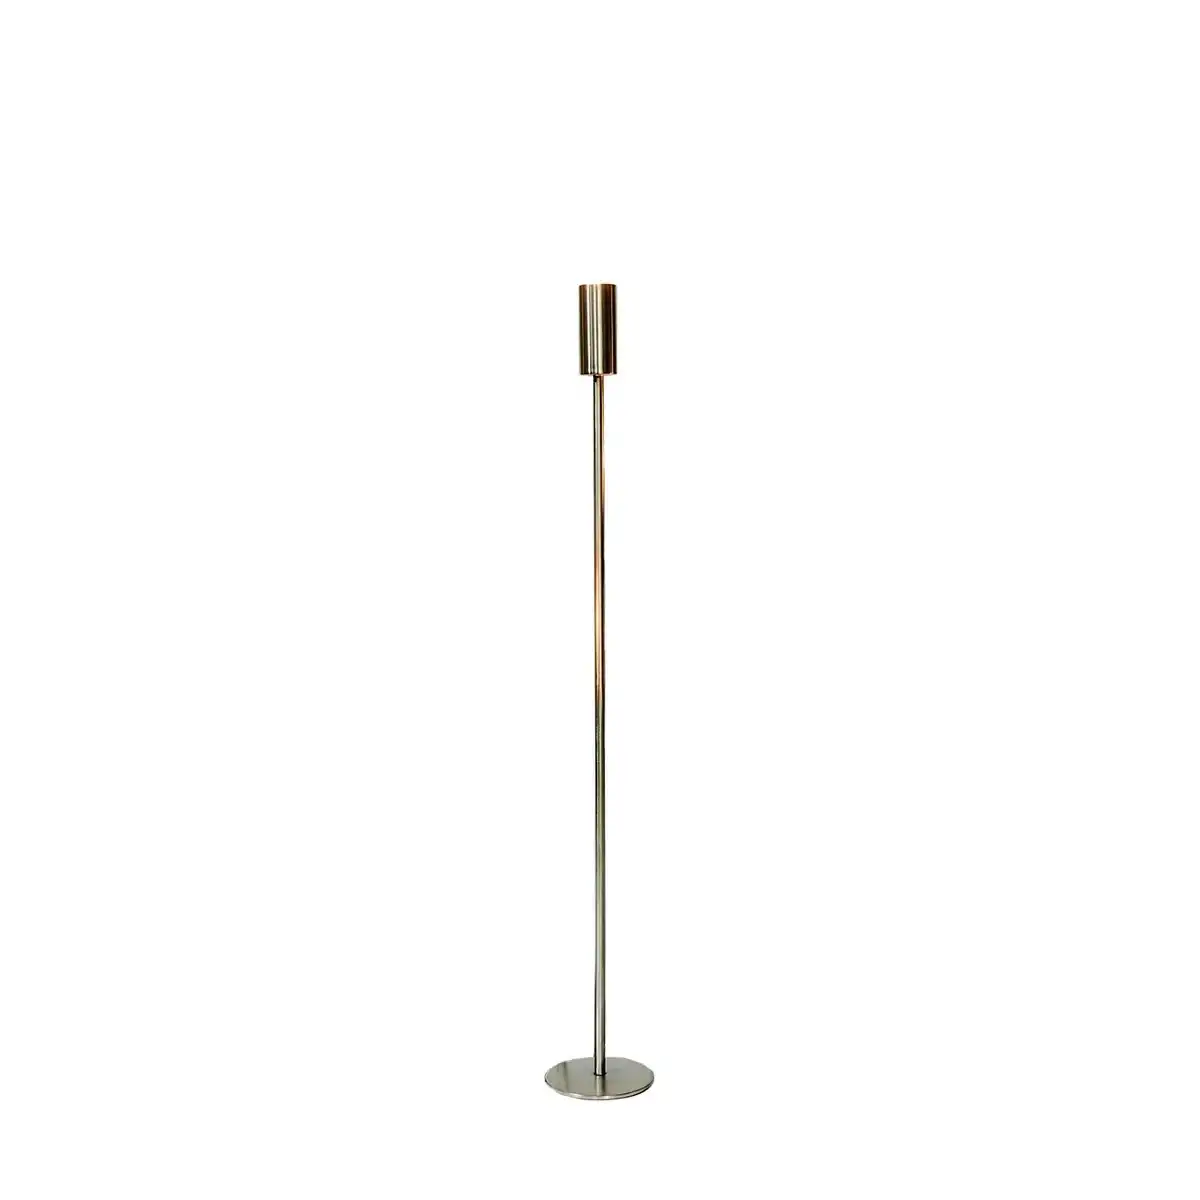 SSH Collection Ava 90cm Tall Single Candle Stand - Nickel